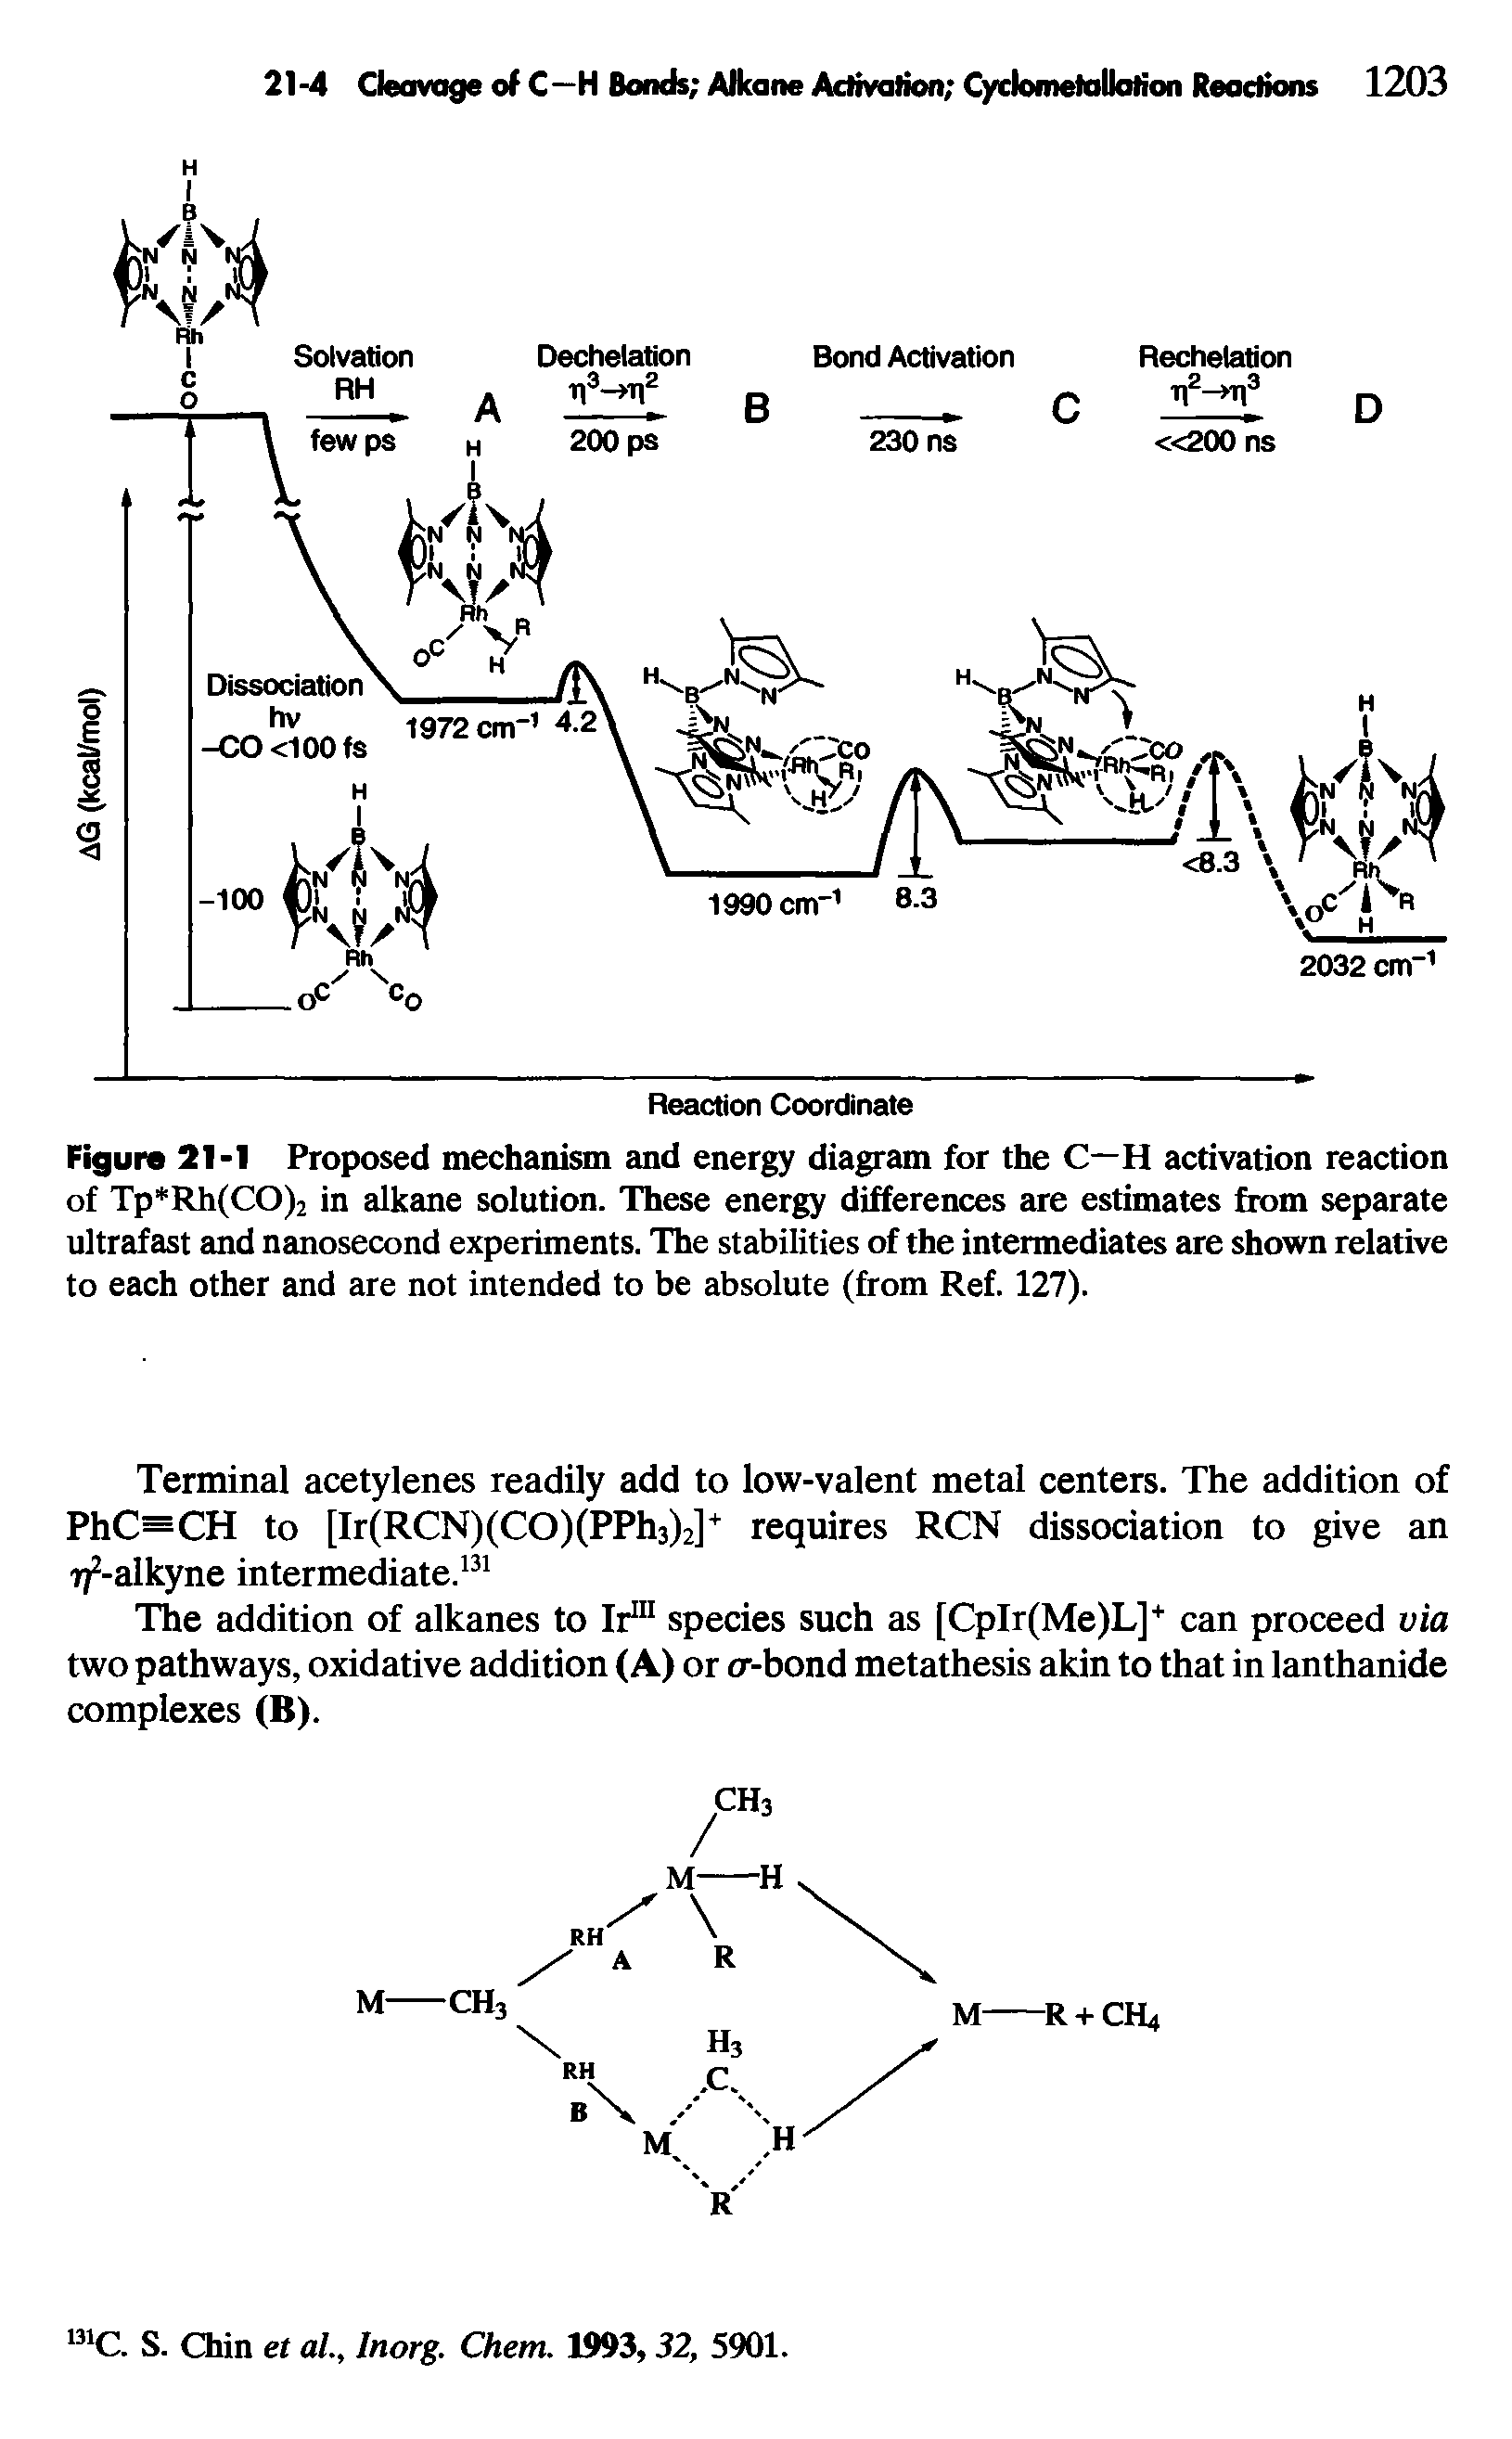 Figure 21-1 Proposed mechanism and energy diagram for the C—H activation reaction of Tp Rh(CO)2 in alkane solution. These energy differences are estimates from separate ultrafast and nanosecond experiments. The stabilities of the intermediates are shown relative to each other and are not intended to be absolute (from Ref. 127).